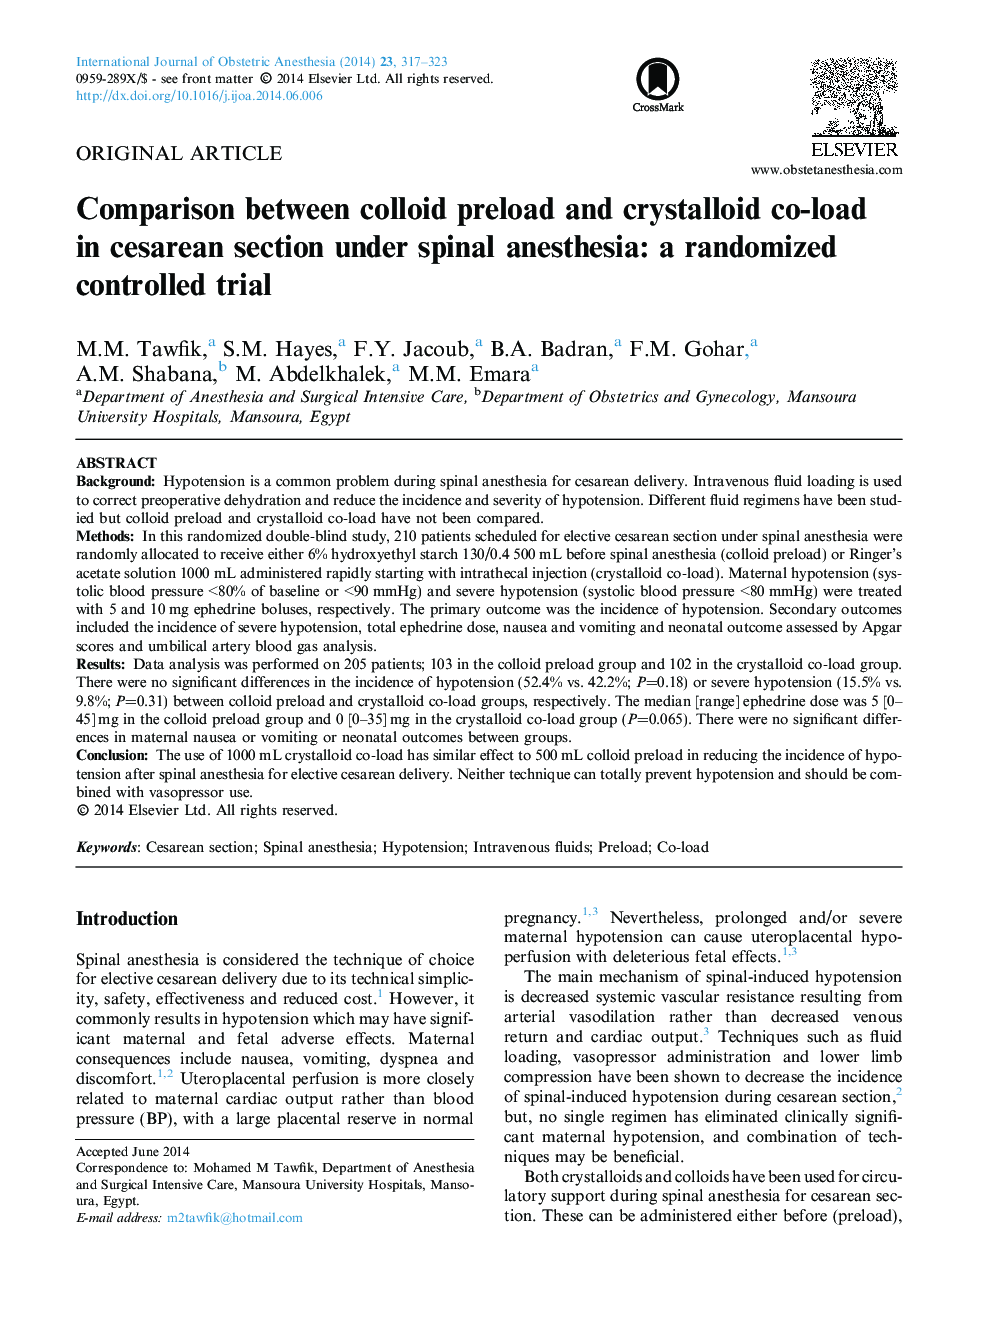 Comparison between colloid preload and crystalloid co-load in cesarean section under spinal anesthesia: a randomized controlled trial